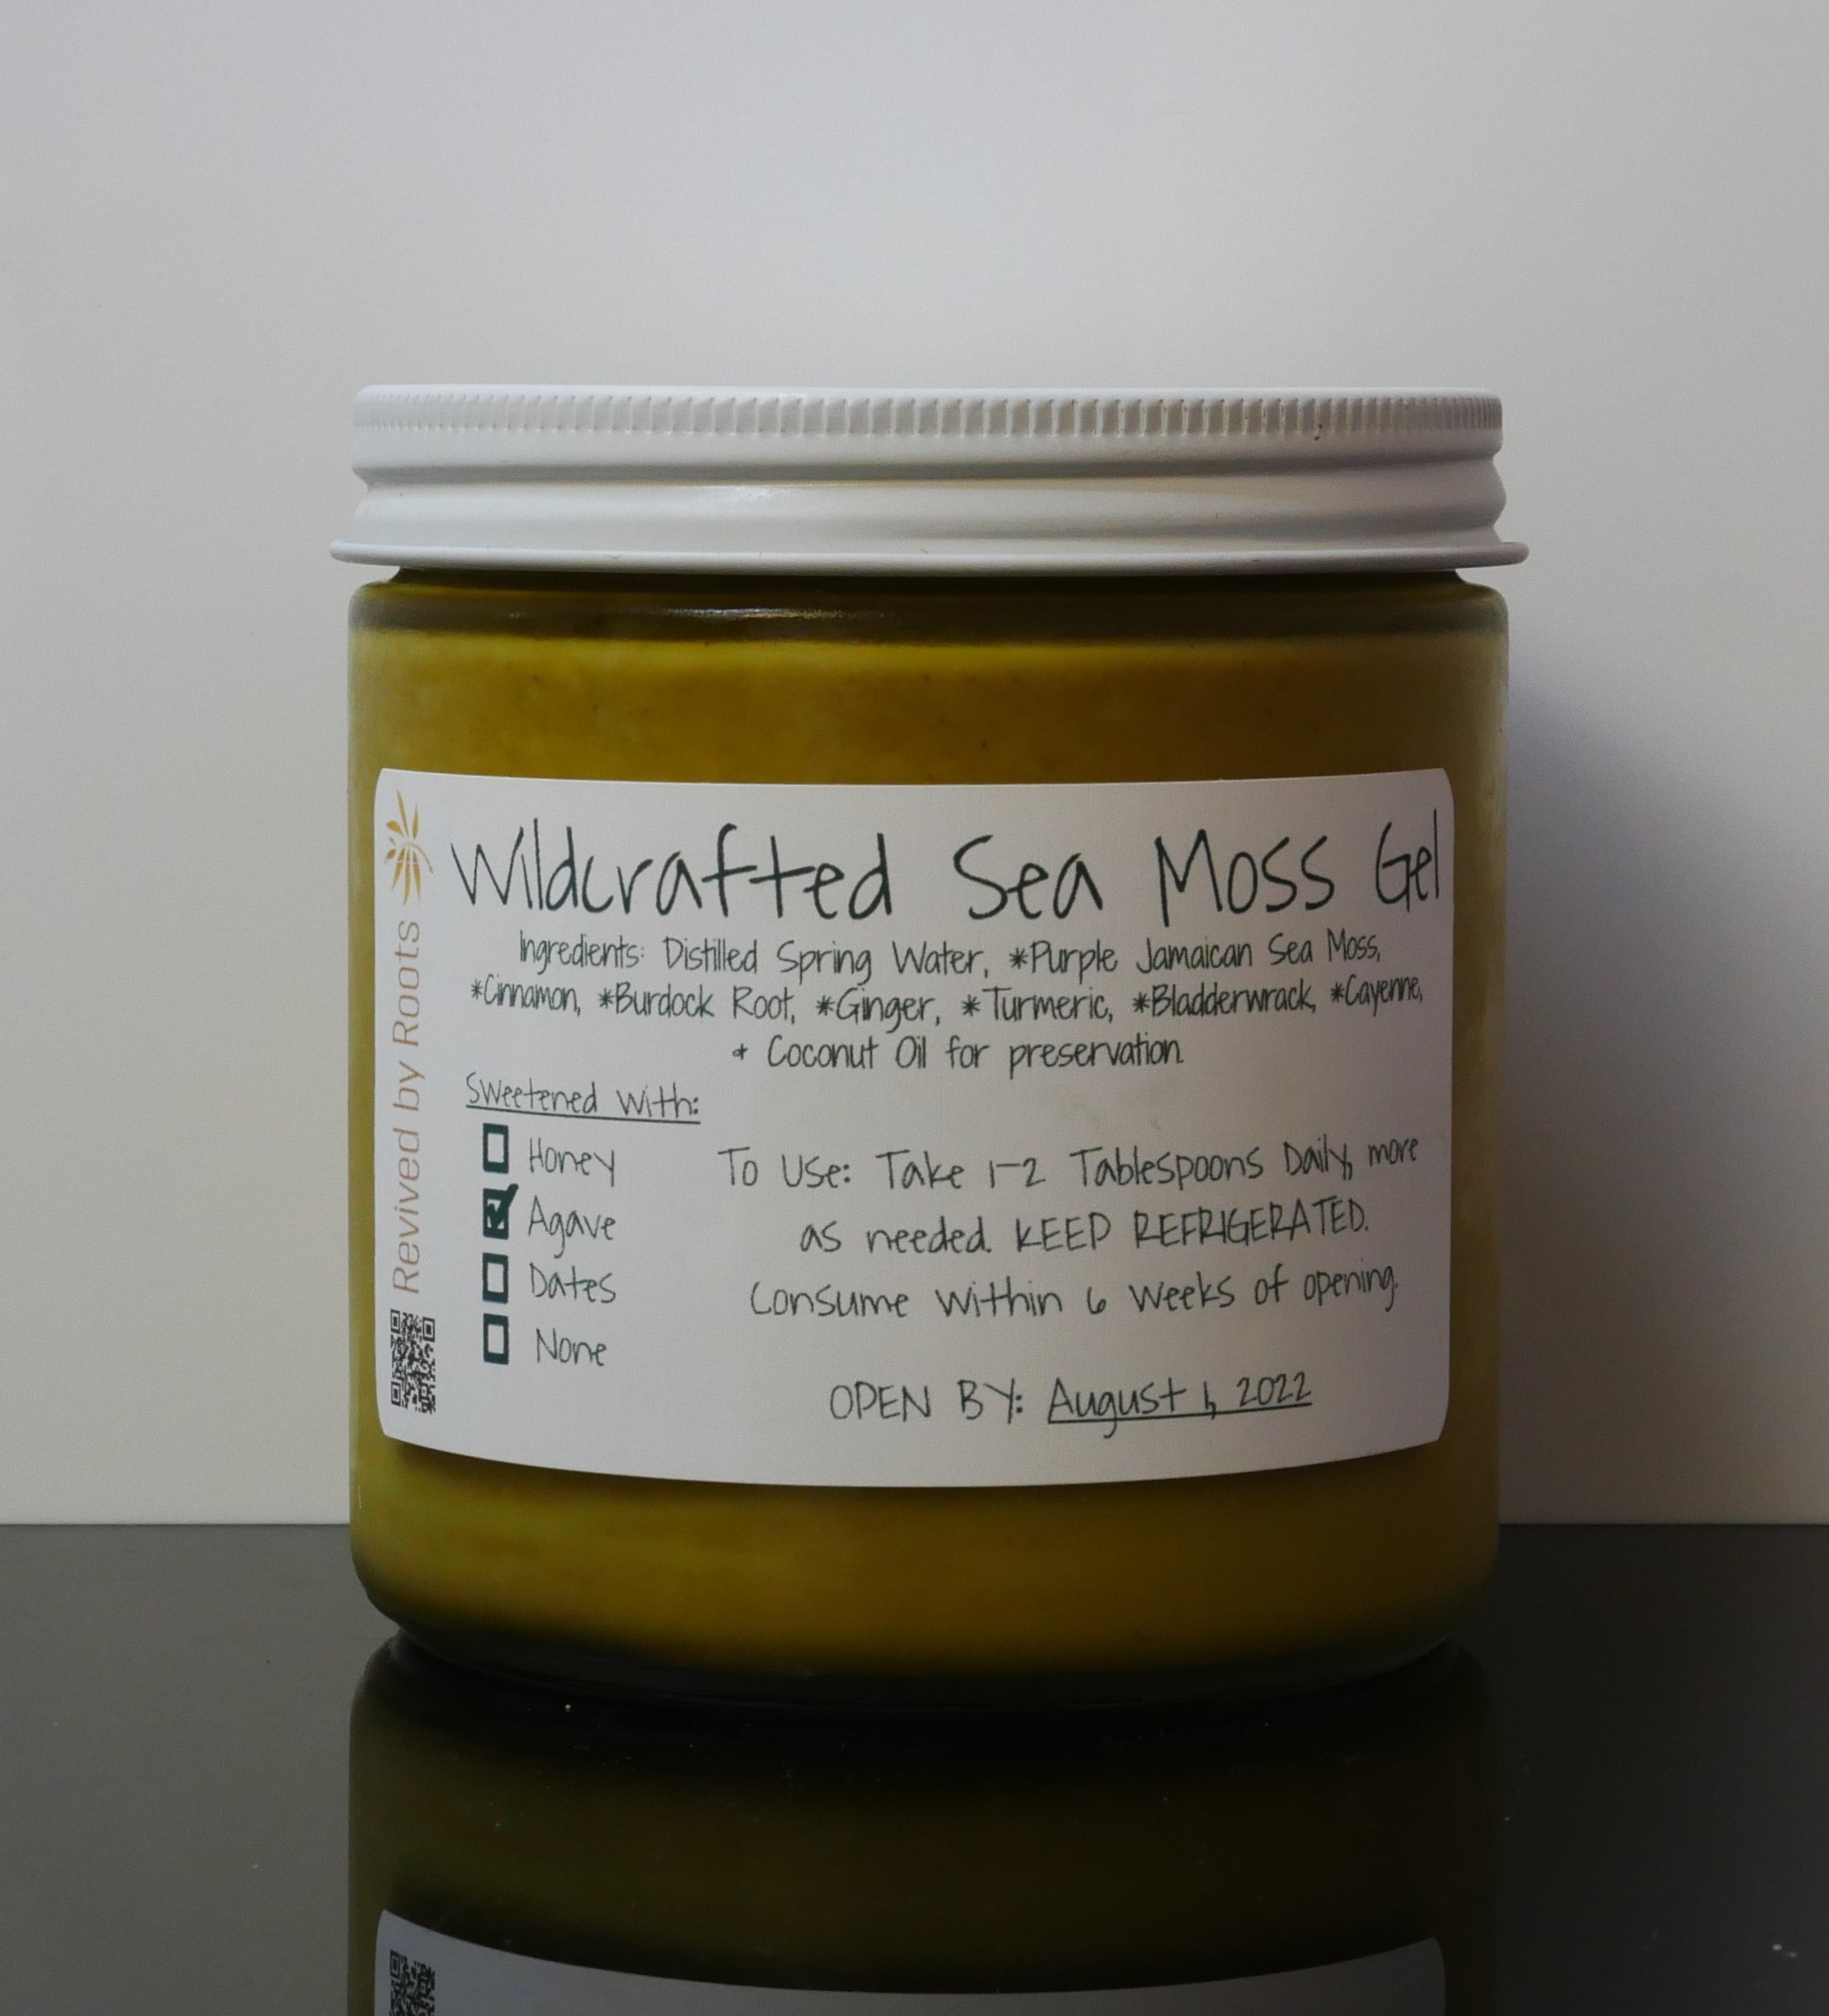 Sea Moss Gel (Wildcrafted) - All Natural Herb Remedies by Revived By Roots